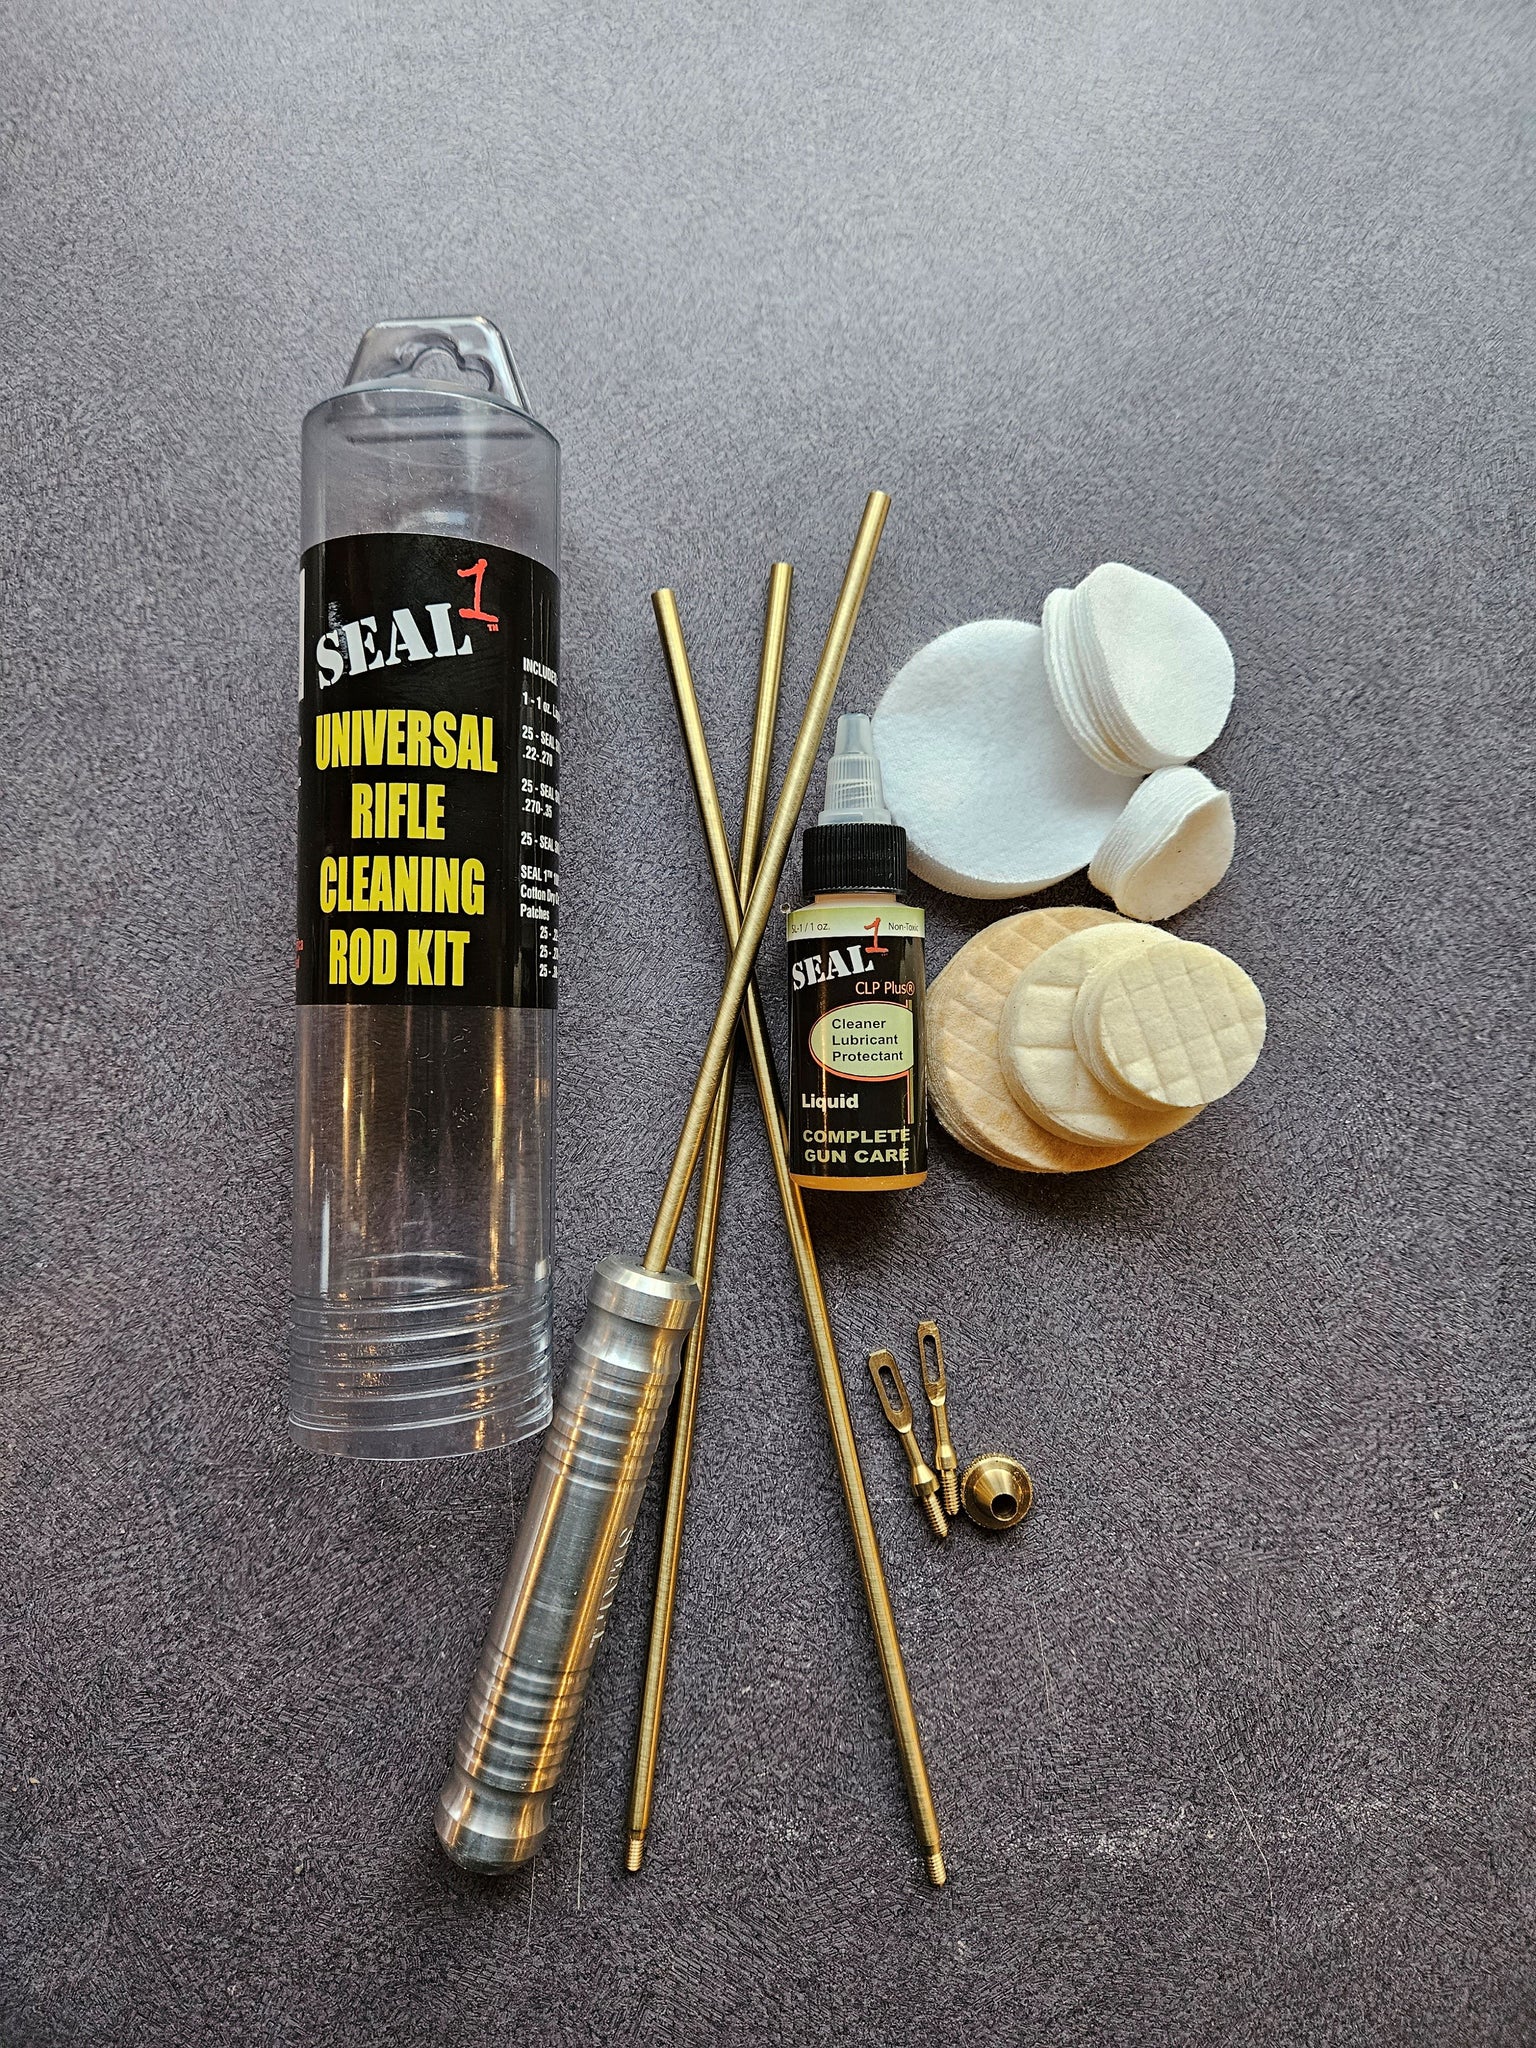 Universal Rifle Cleaning Rod Kit